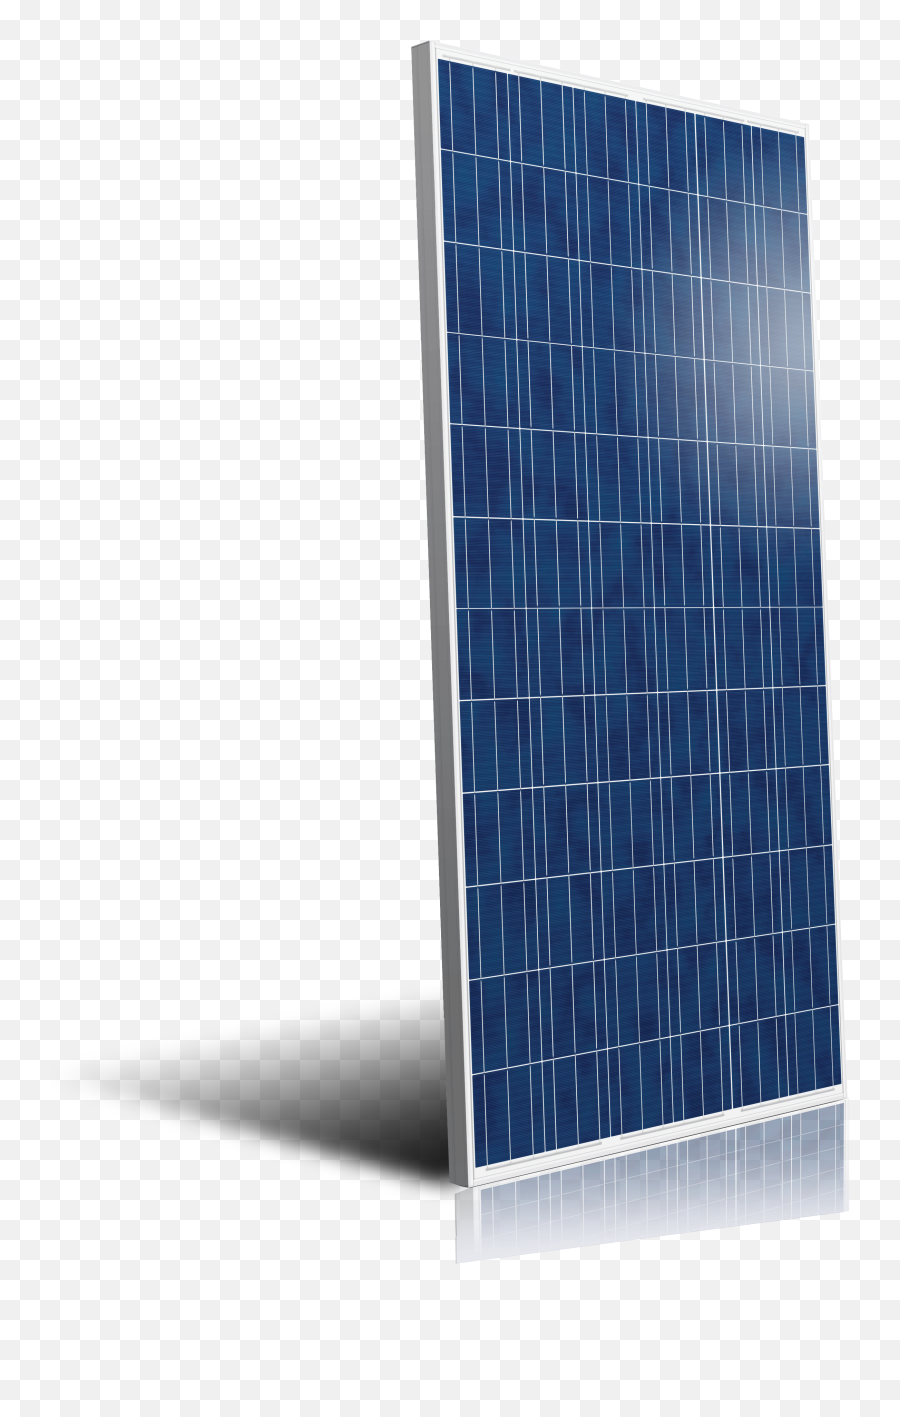 Png Images Pngs Solar Solar Panel Emoji,Solar Panel Png